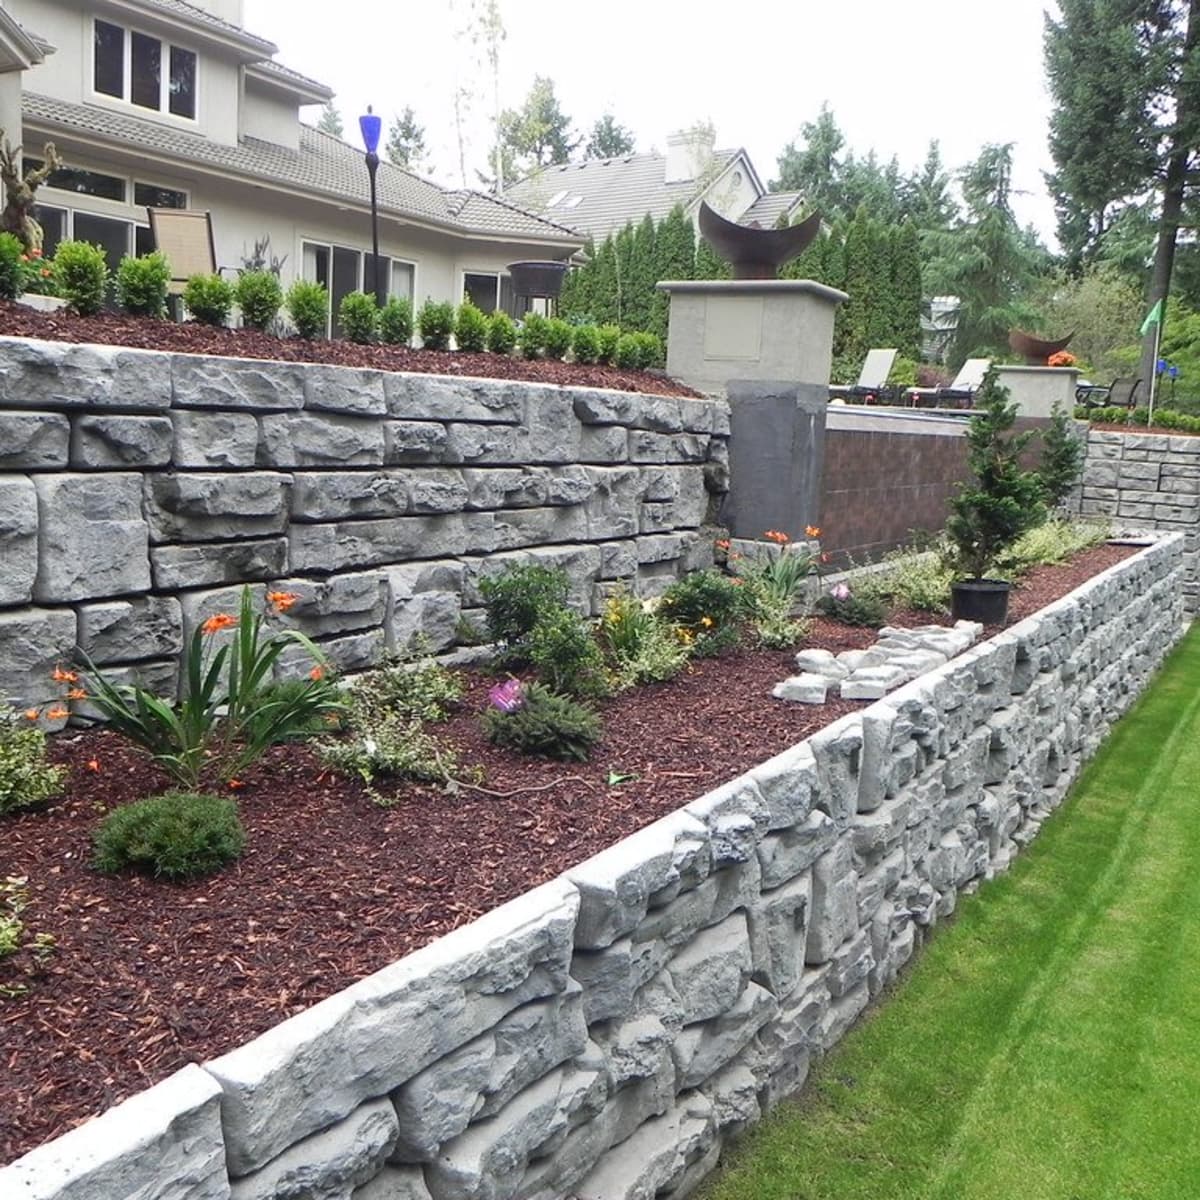 Build A Dry Stack Stone Retaining Wall, Stacked Stone Landscaping Ideas